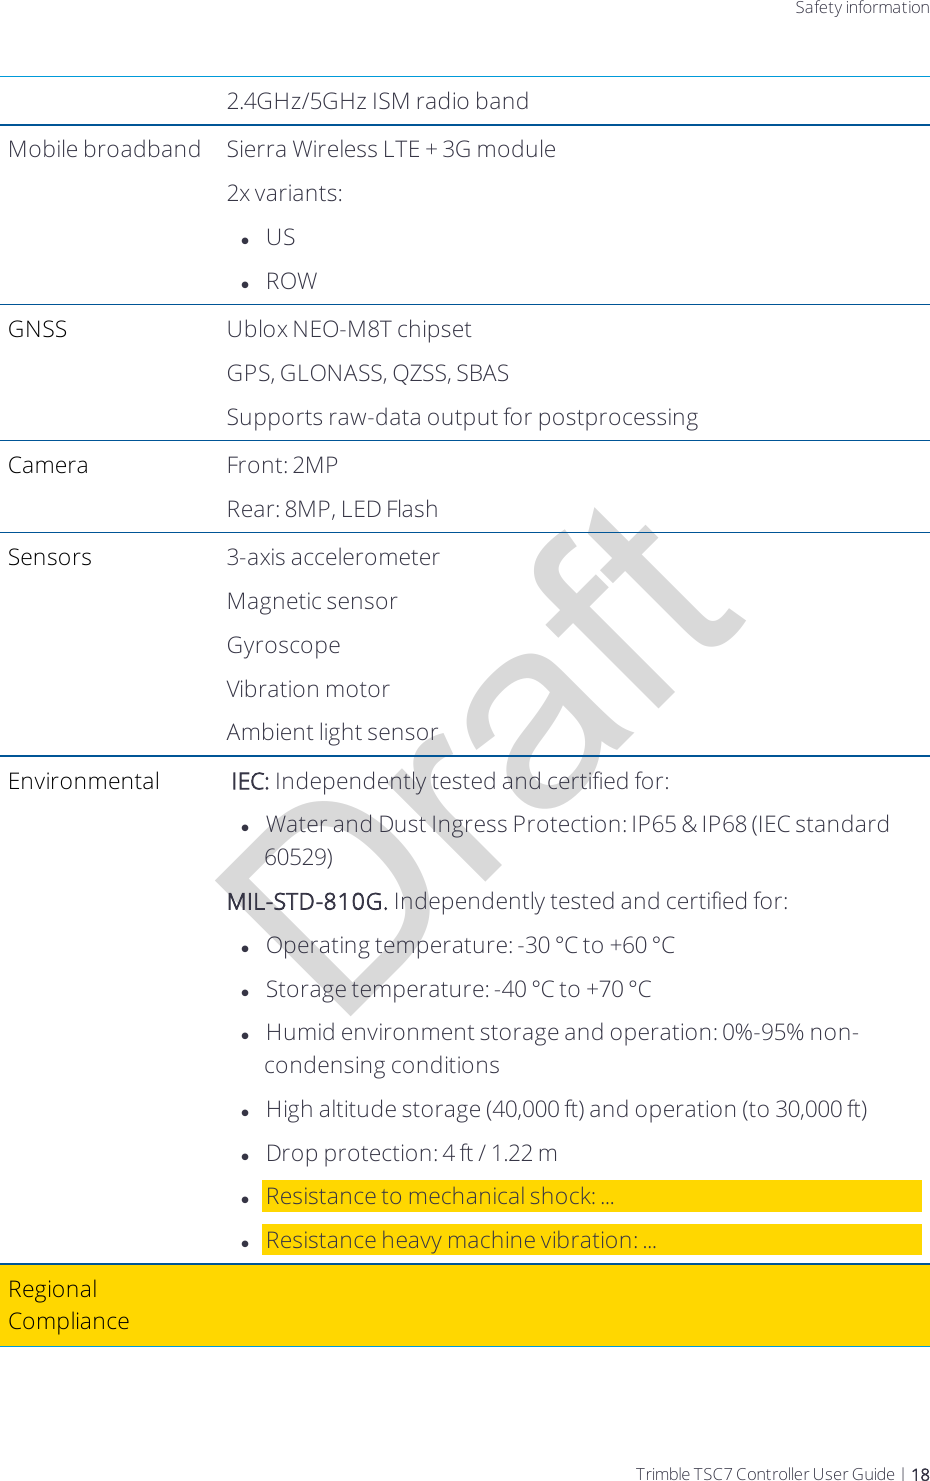 DraftSafety information2.4GHz/5GHz ISM radio bandMobile broadband Sierra Wireless LTE + 3G module2x variants: lUSlROWGNSS  Ublox NEO-M8T chipsetGPS, GLONASS, QZSS, SBASSupports raw-data output for postprocessingCamera Front: 2MPRear: 8MP, LED FlashSensors 3-axis accelerometerMagnetic sensorGyroscopeVibration motorAmbient light sensorEnvironmental  IEC: Independently tested and certified for:lWater and Dust Ingress Protection: IP65 &amp; IP68 (IEC standard 60529)MIL-STD-810G. Independently tested and certified for:lOperating temperature: -30 °C to +60 °ClStorage temperature: -40 °C to +70 °ClHumid environment storage and operation: 0%-95% non-condensing conditionslHigh altitude storage (40,000 ft)  and operation (to 30,000 ft)lDrop protection: 4 ft / 1.22 mlResistance to mechanical shock: ...lResistance heavy machine vibration: ...Regional ComplianceTrimble TSC7 Controller User Guide | 18